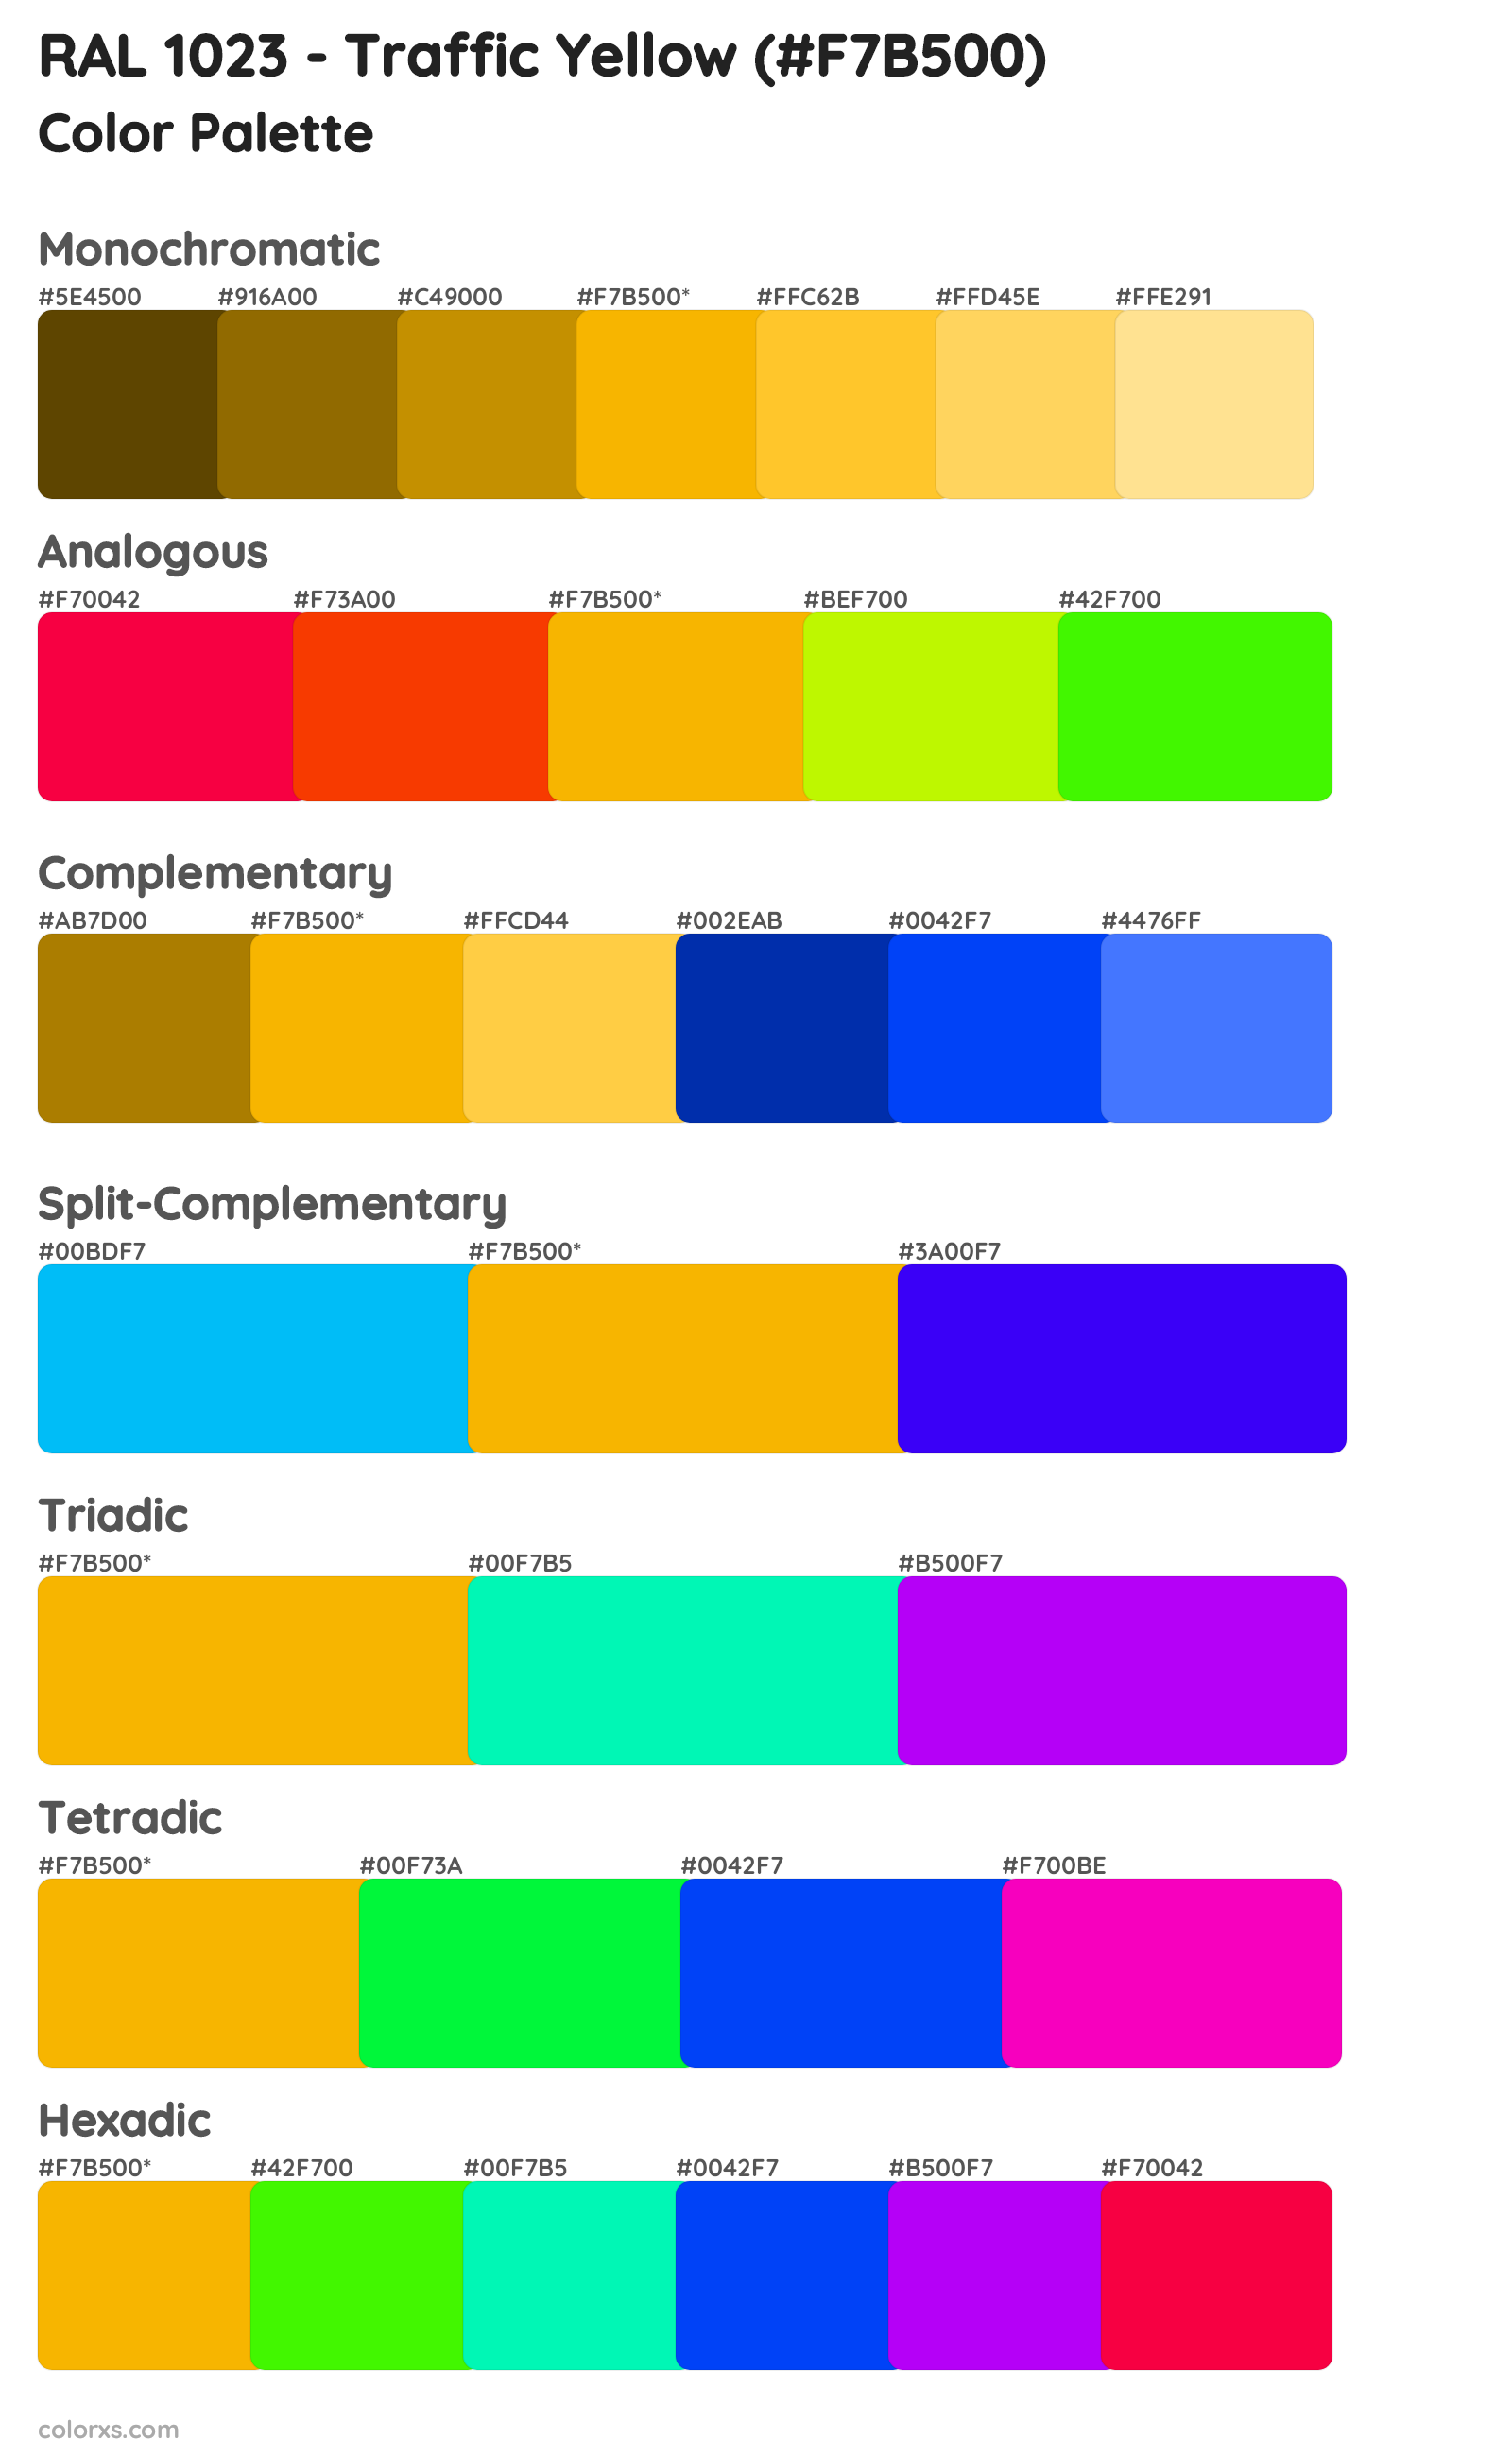 RAL 1023 - Traffic Yellow Color Scheme Palettes